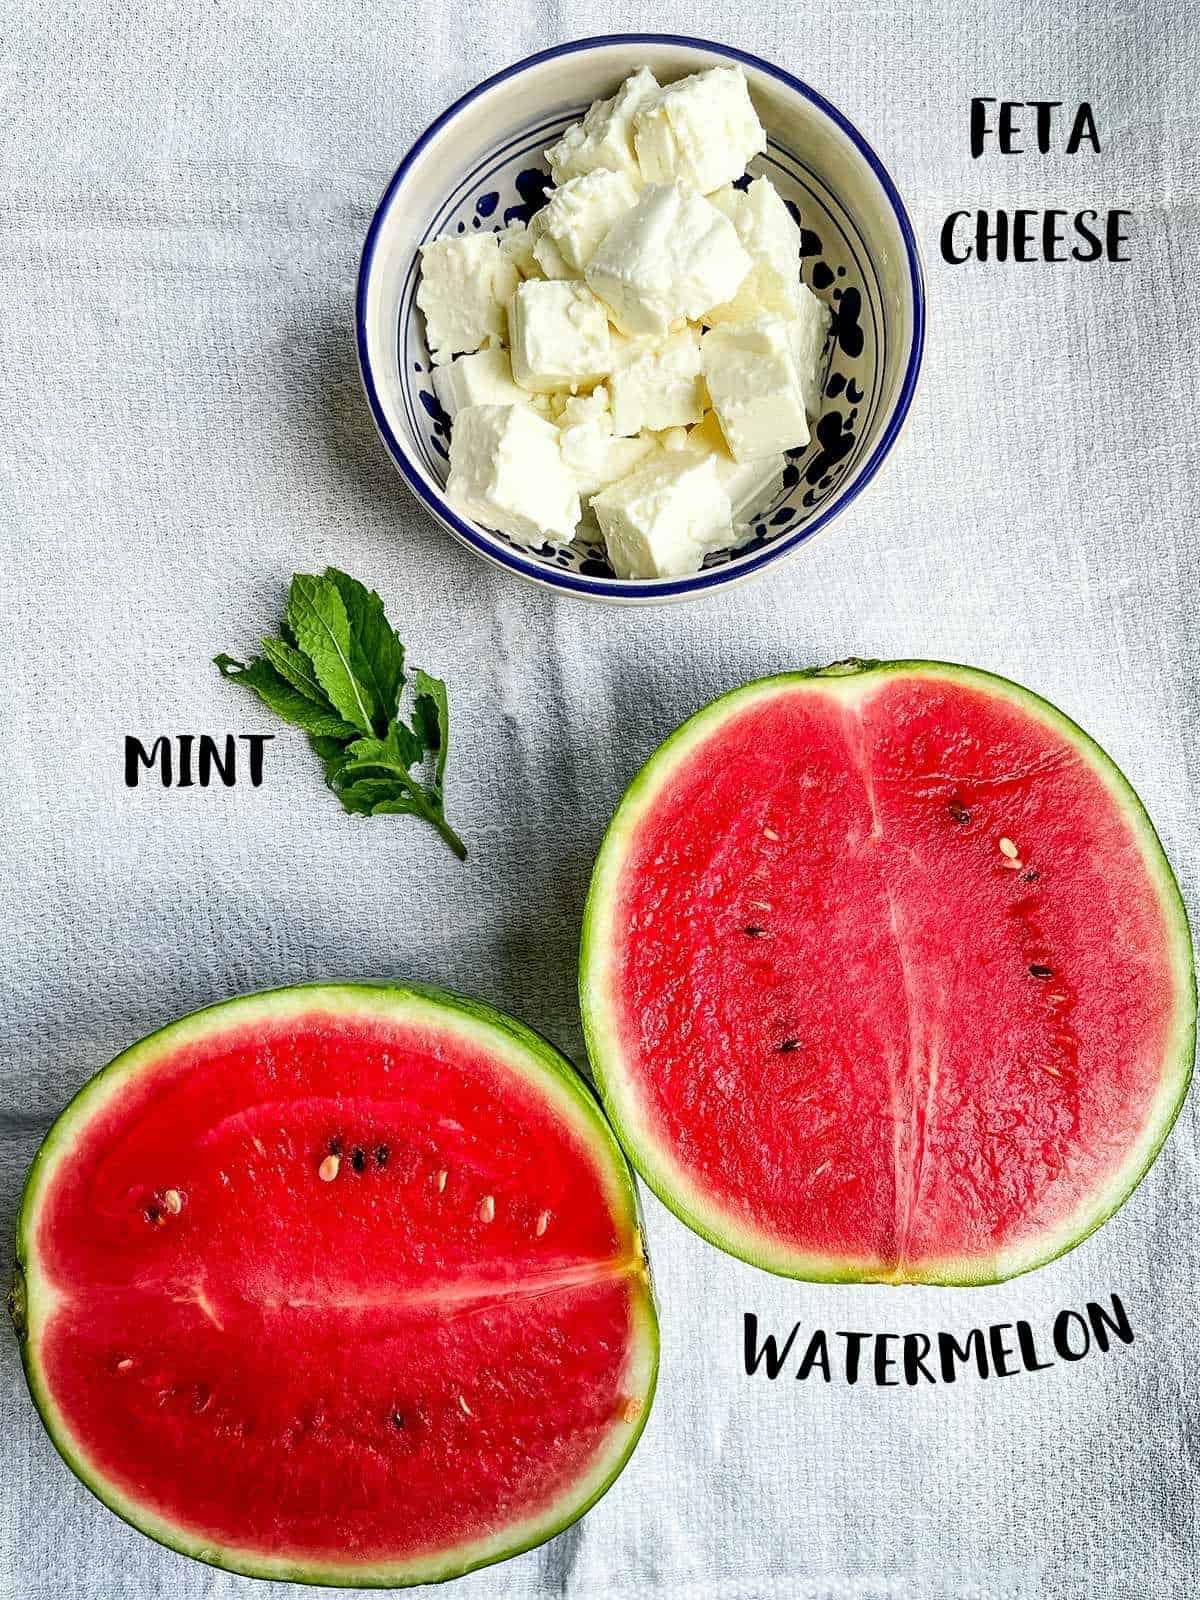 A sliced melon, a sprig of mint and a bowl of cubed feta cheese (all with labels) on a white cloth.